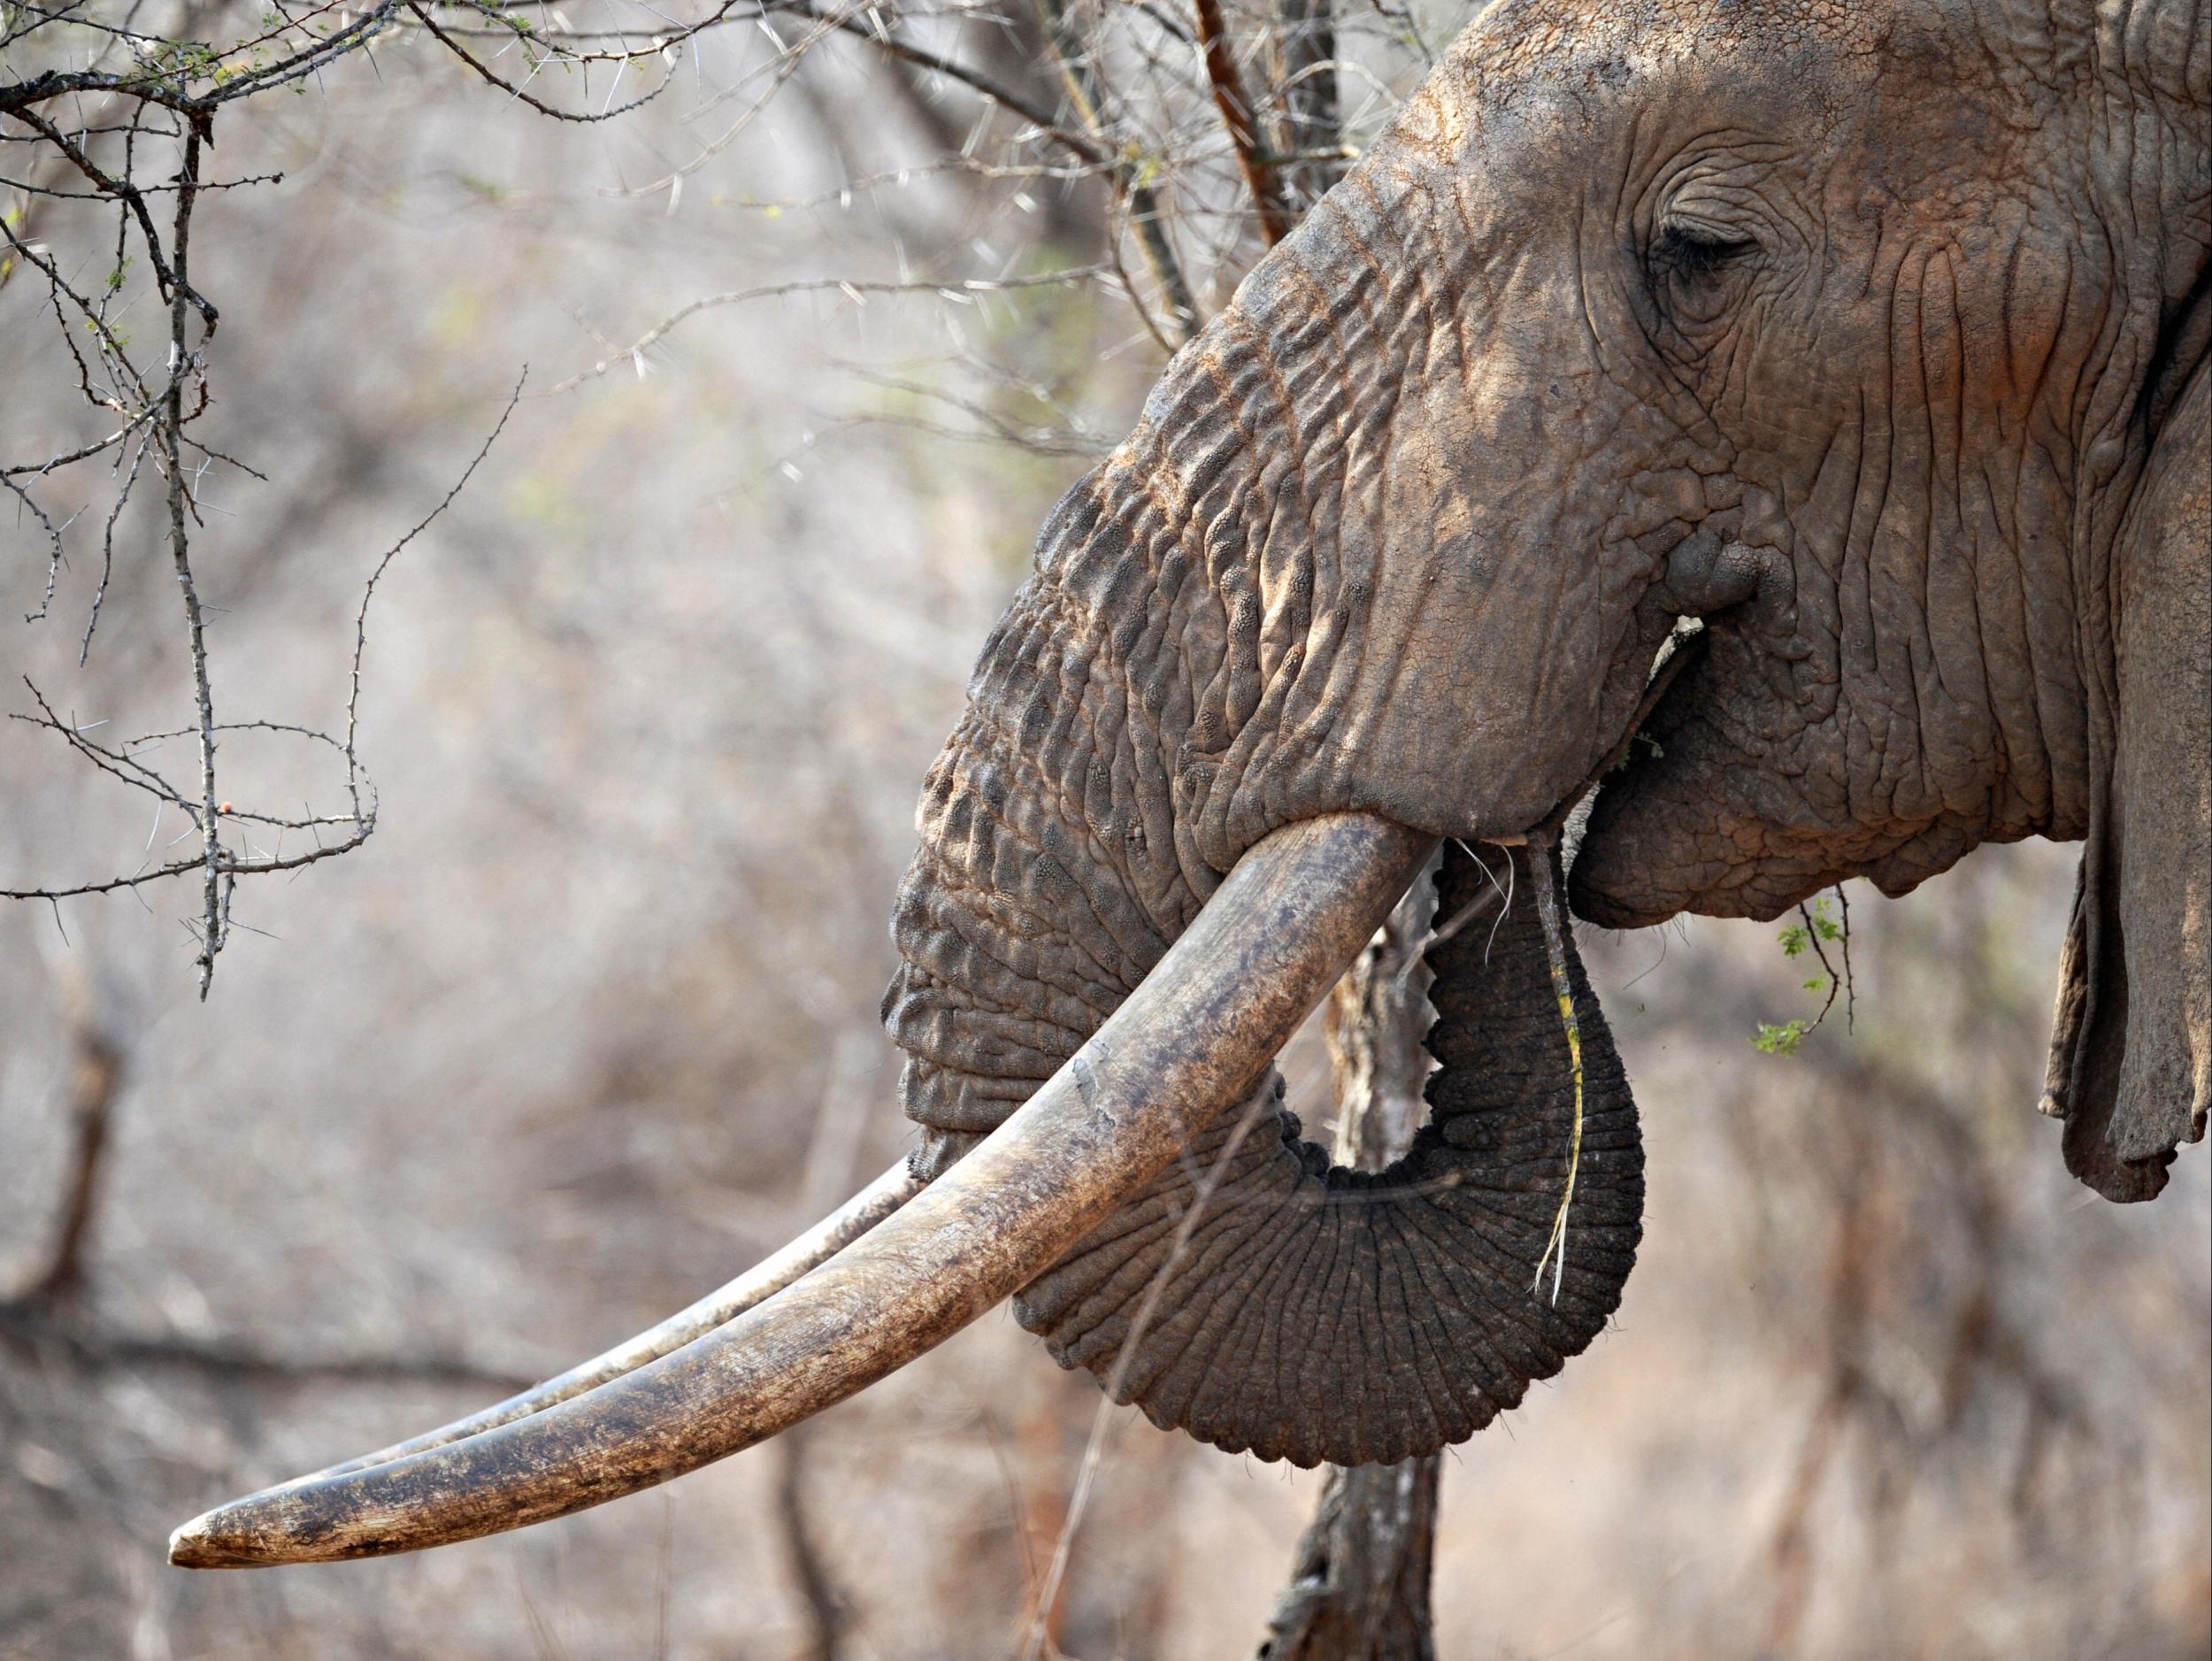 The private sphere has a key role to play in efforts to halt poaching